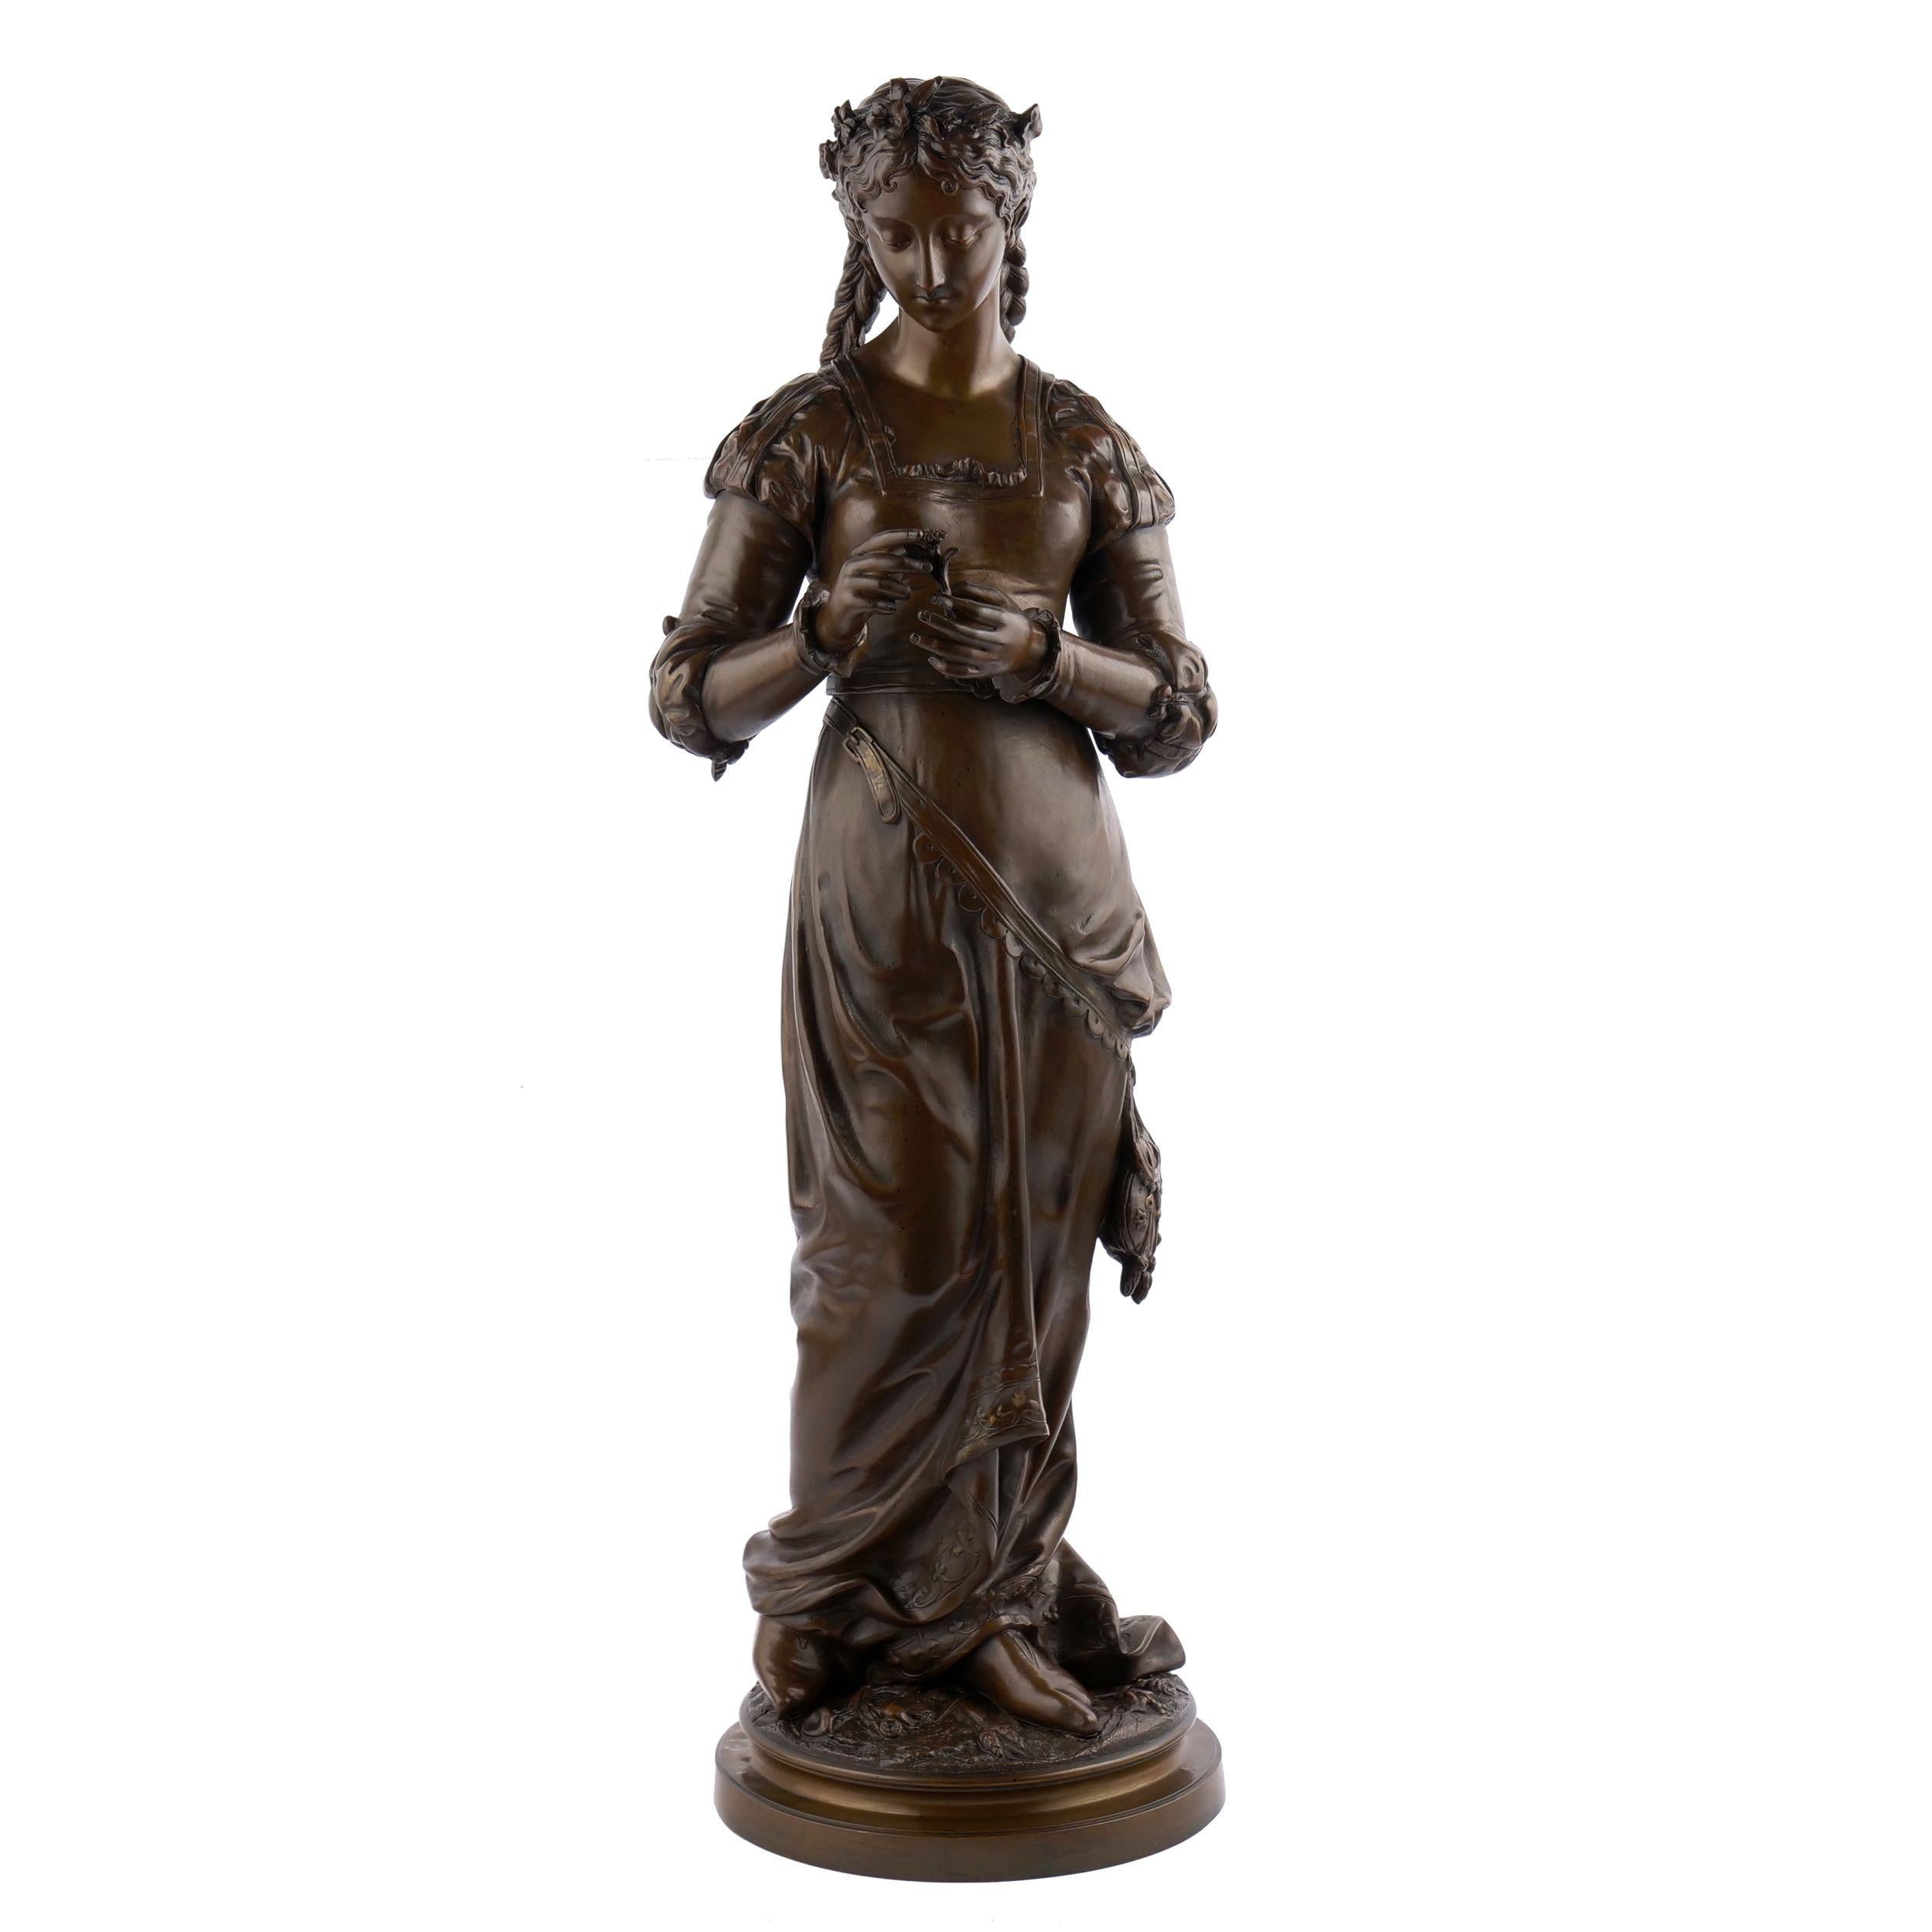 Steeped in the romantic, this gorgeous figural sculpture was modelled by Charles Anfrie (French, 1833-1905) first as a group with a young man having handed this flower to the girl in an attempt to garner her affections. That model suggests what